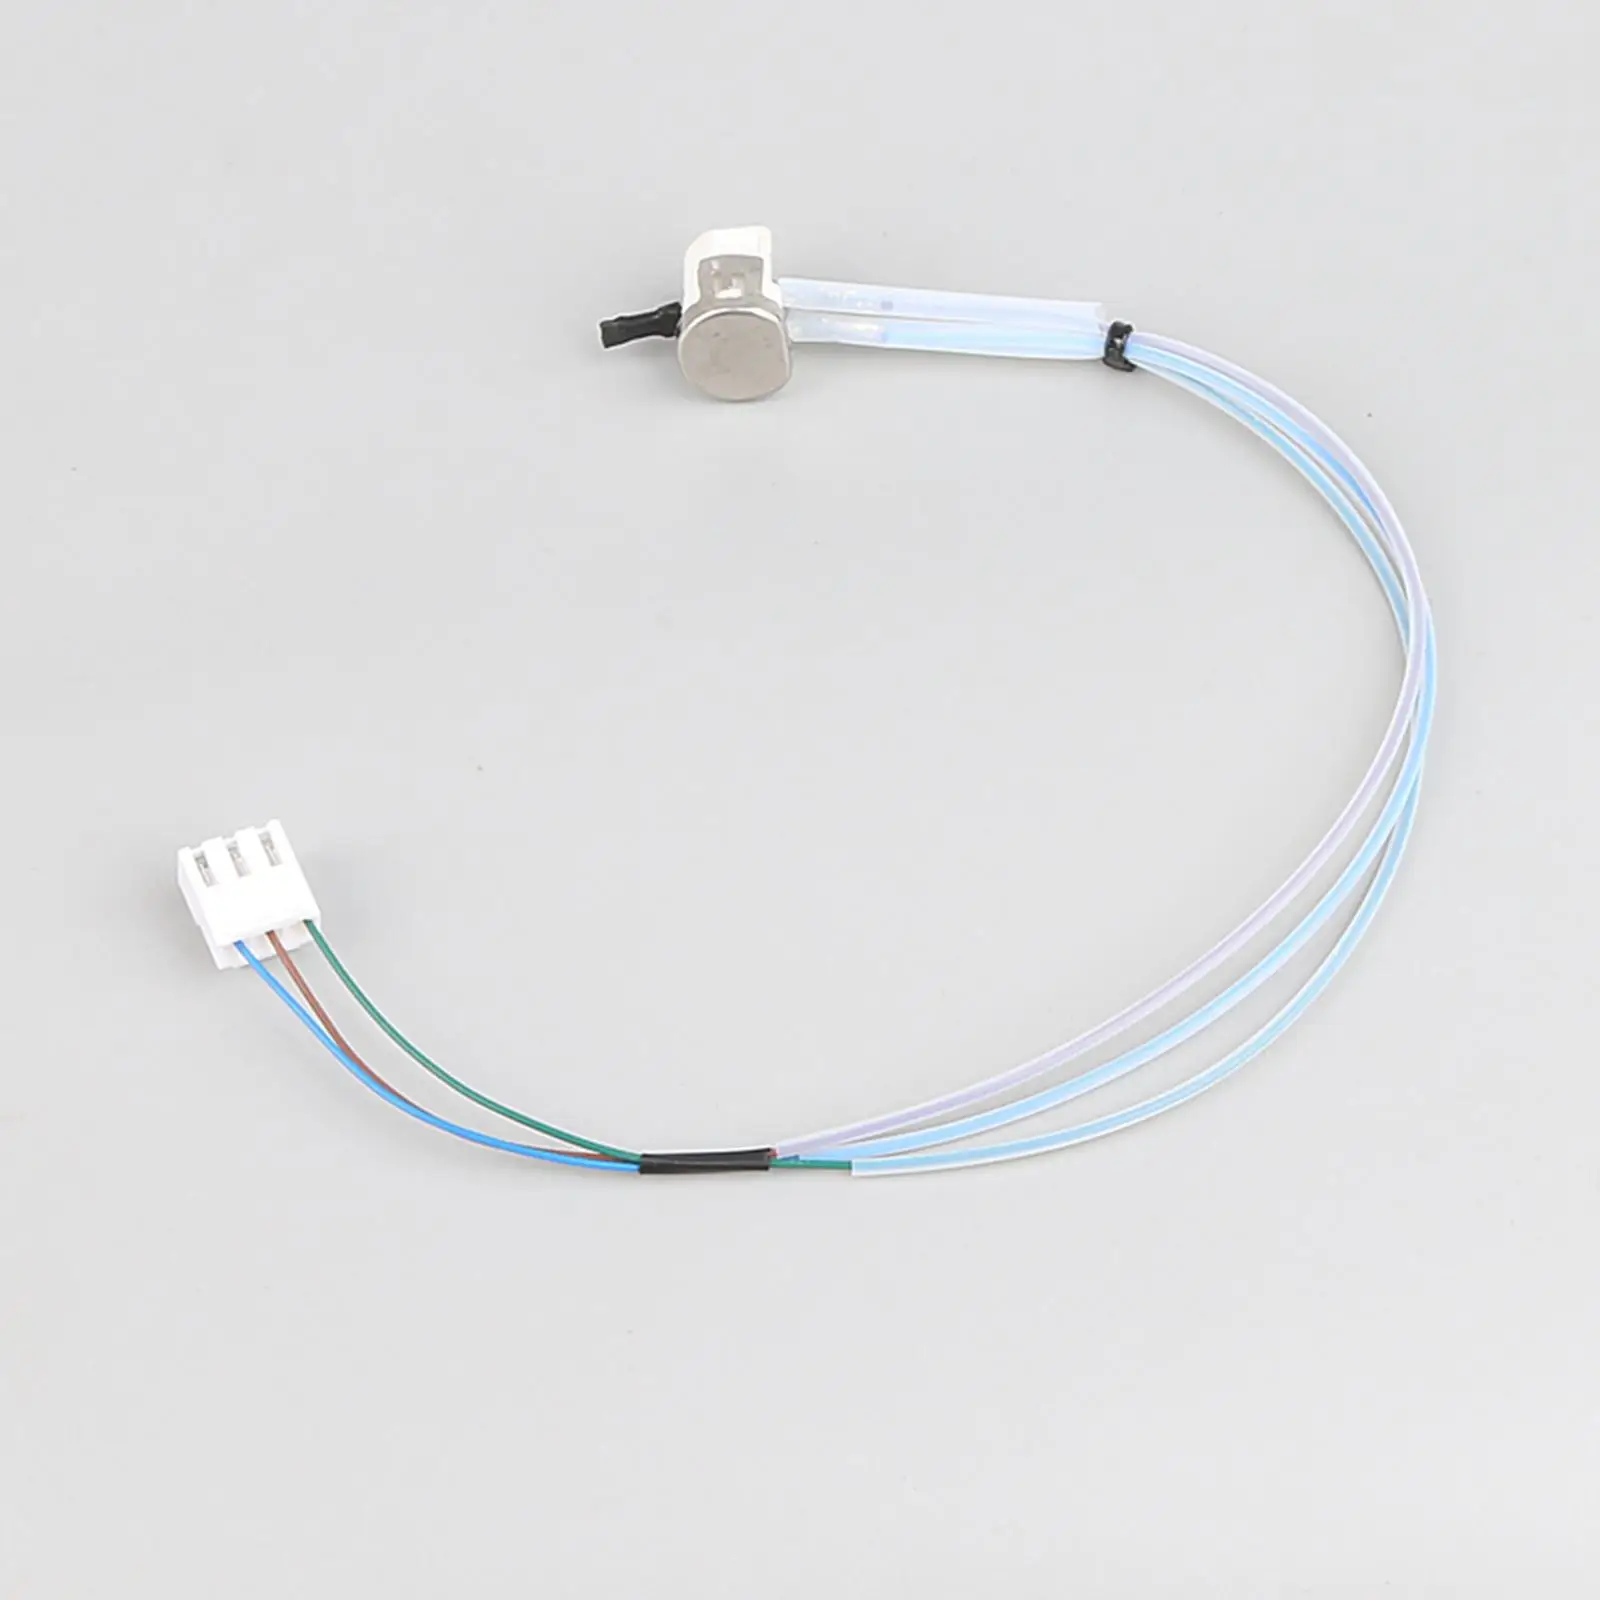 Replacement PT1000 Temperature Sensor 3 Wire Accessories Sturdy Directly Replace Square Connector for 2kW 5kW Diesel Heater